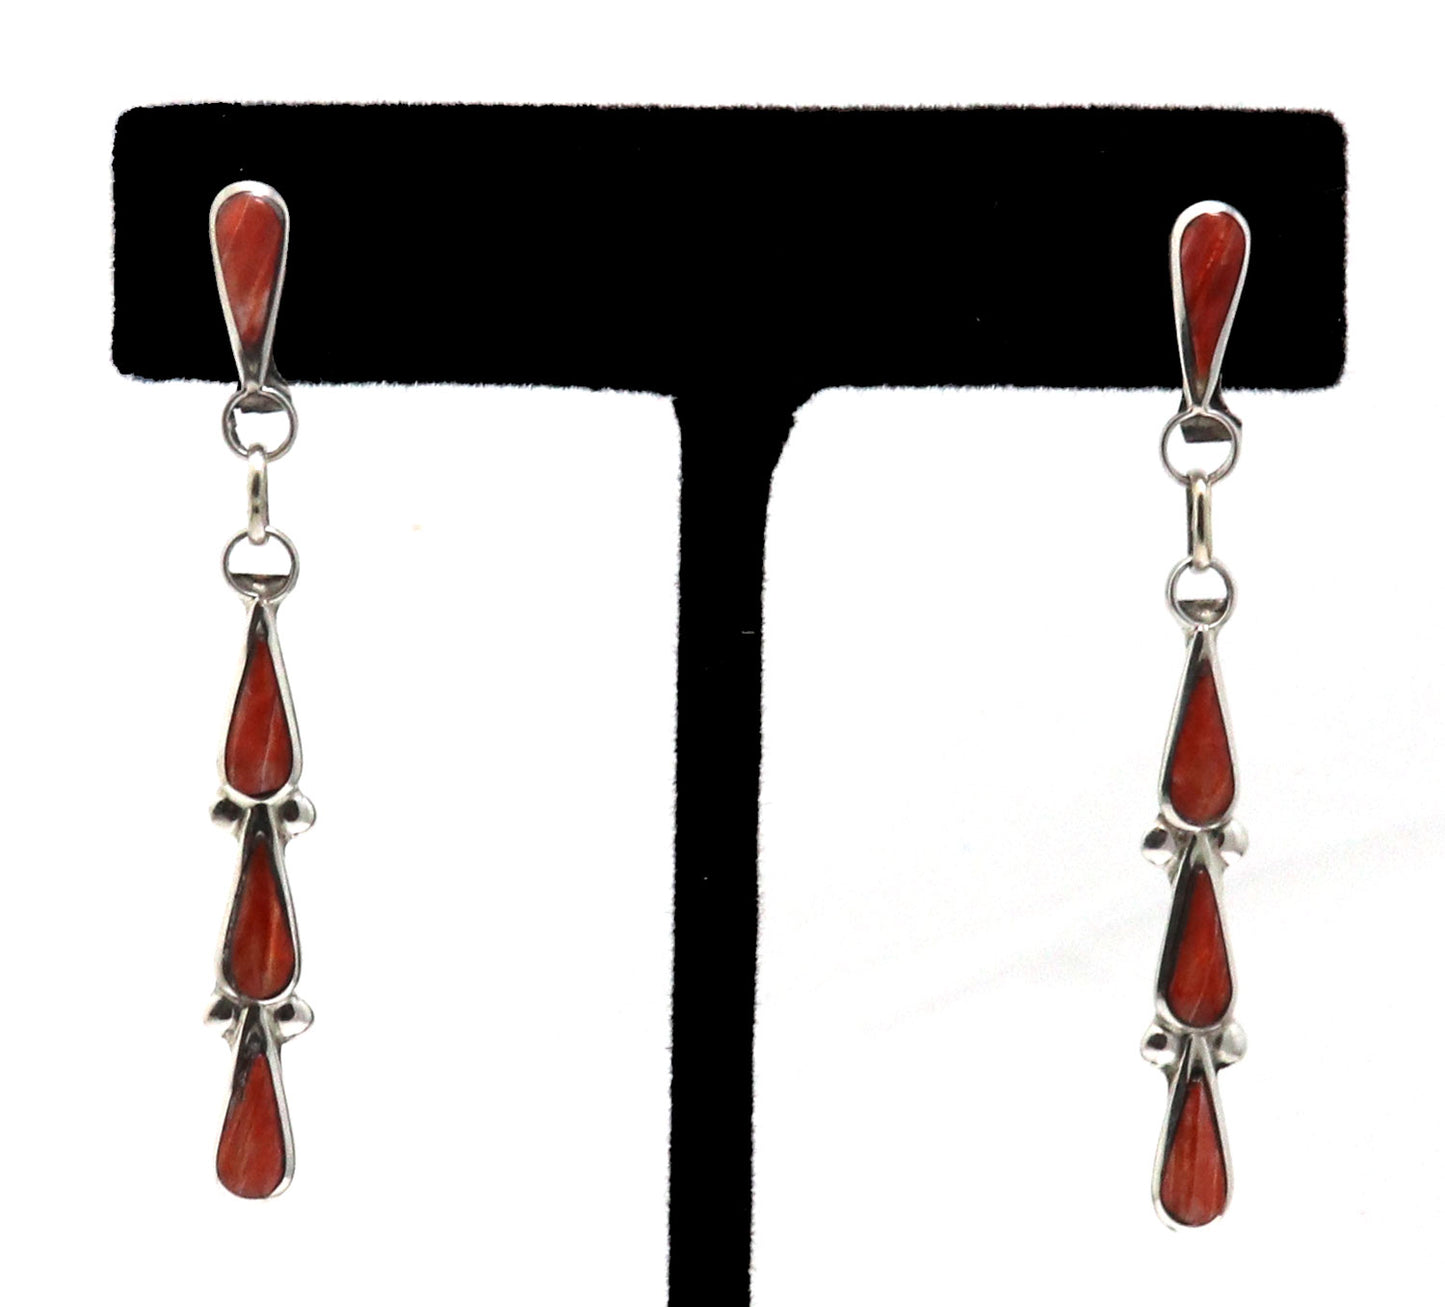 Load image into Gallery viewer, Zuni Red Spiny Oyster Tear Drop Earrings
